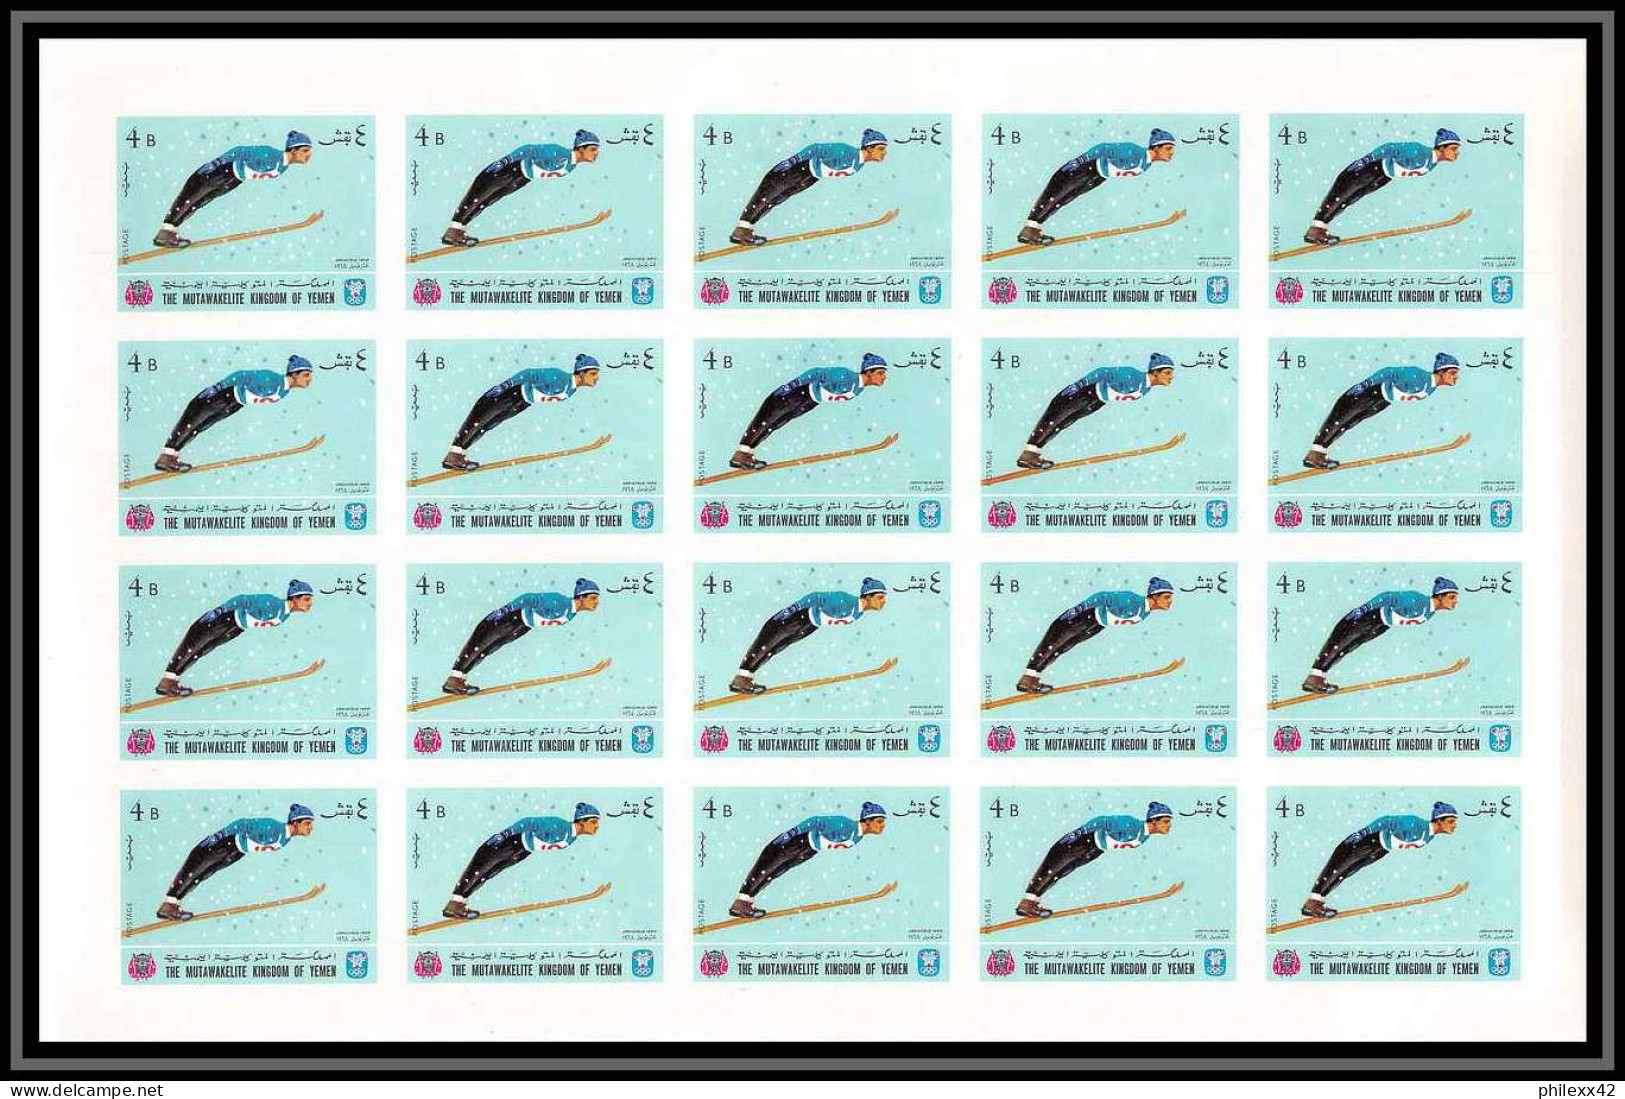 135b Yemen royaume MNH ** N° 454 / 463 B jeux olympiques olympic games grenoble 68 feuilles (sheets) non dentelé (Imperf